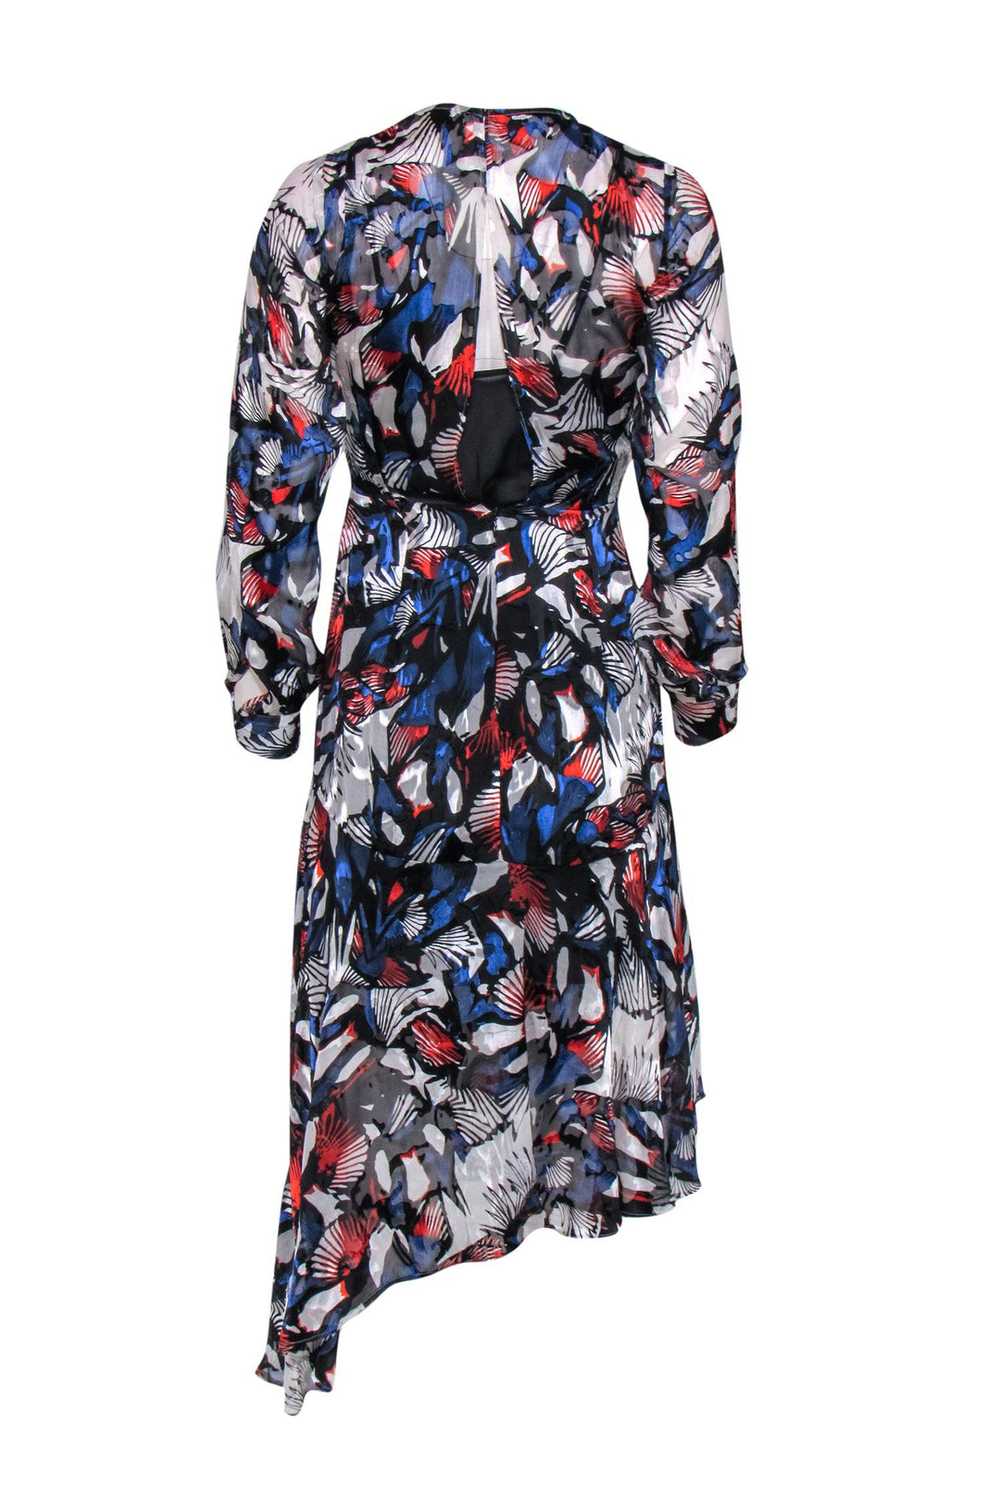 Reiss - Red, White & Blue Floral Print Sheer Long… - image 3